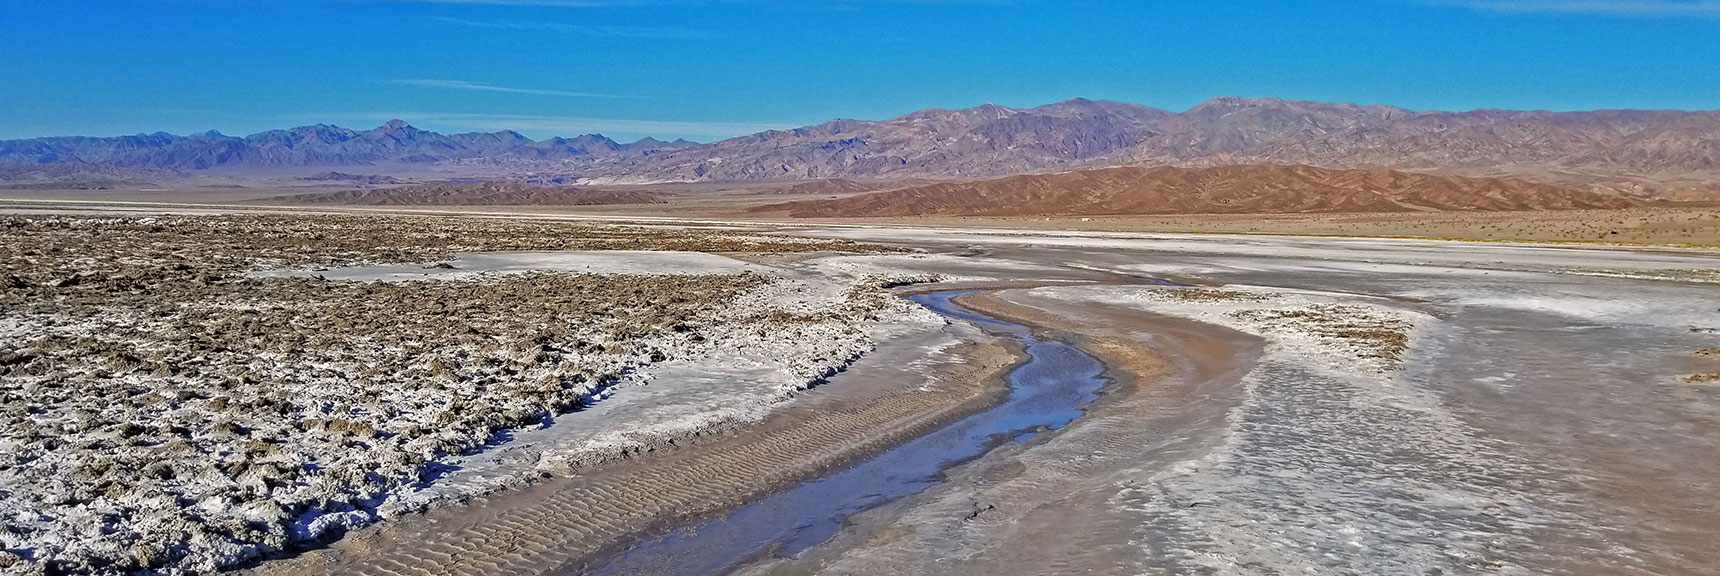 Small Stream Winding Along the Desert Floor. | Return of Lake Manly (Lake in Death Valley) | Death Valley National Park, California